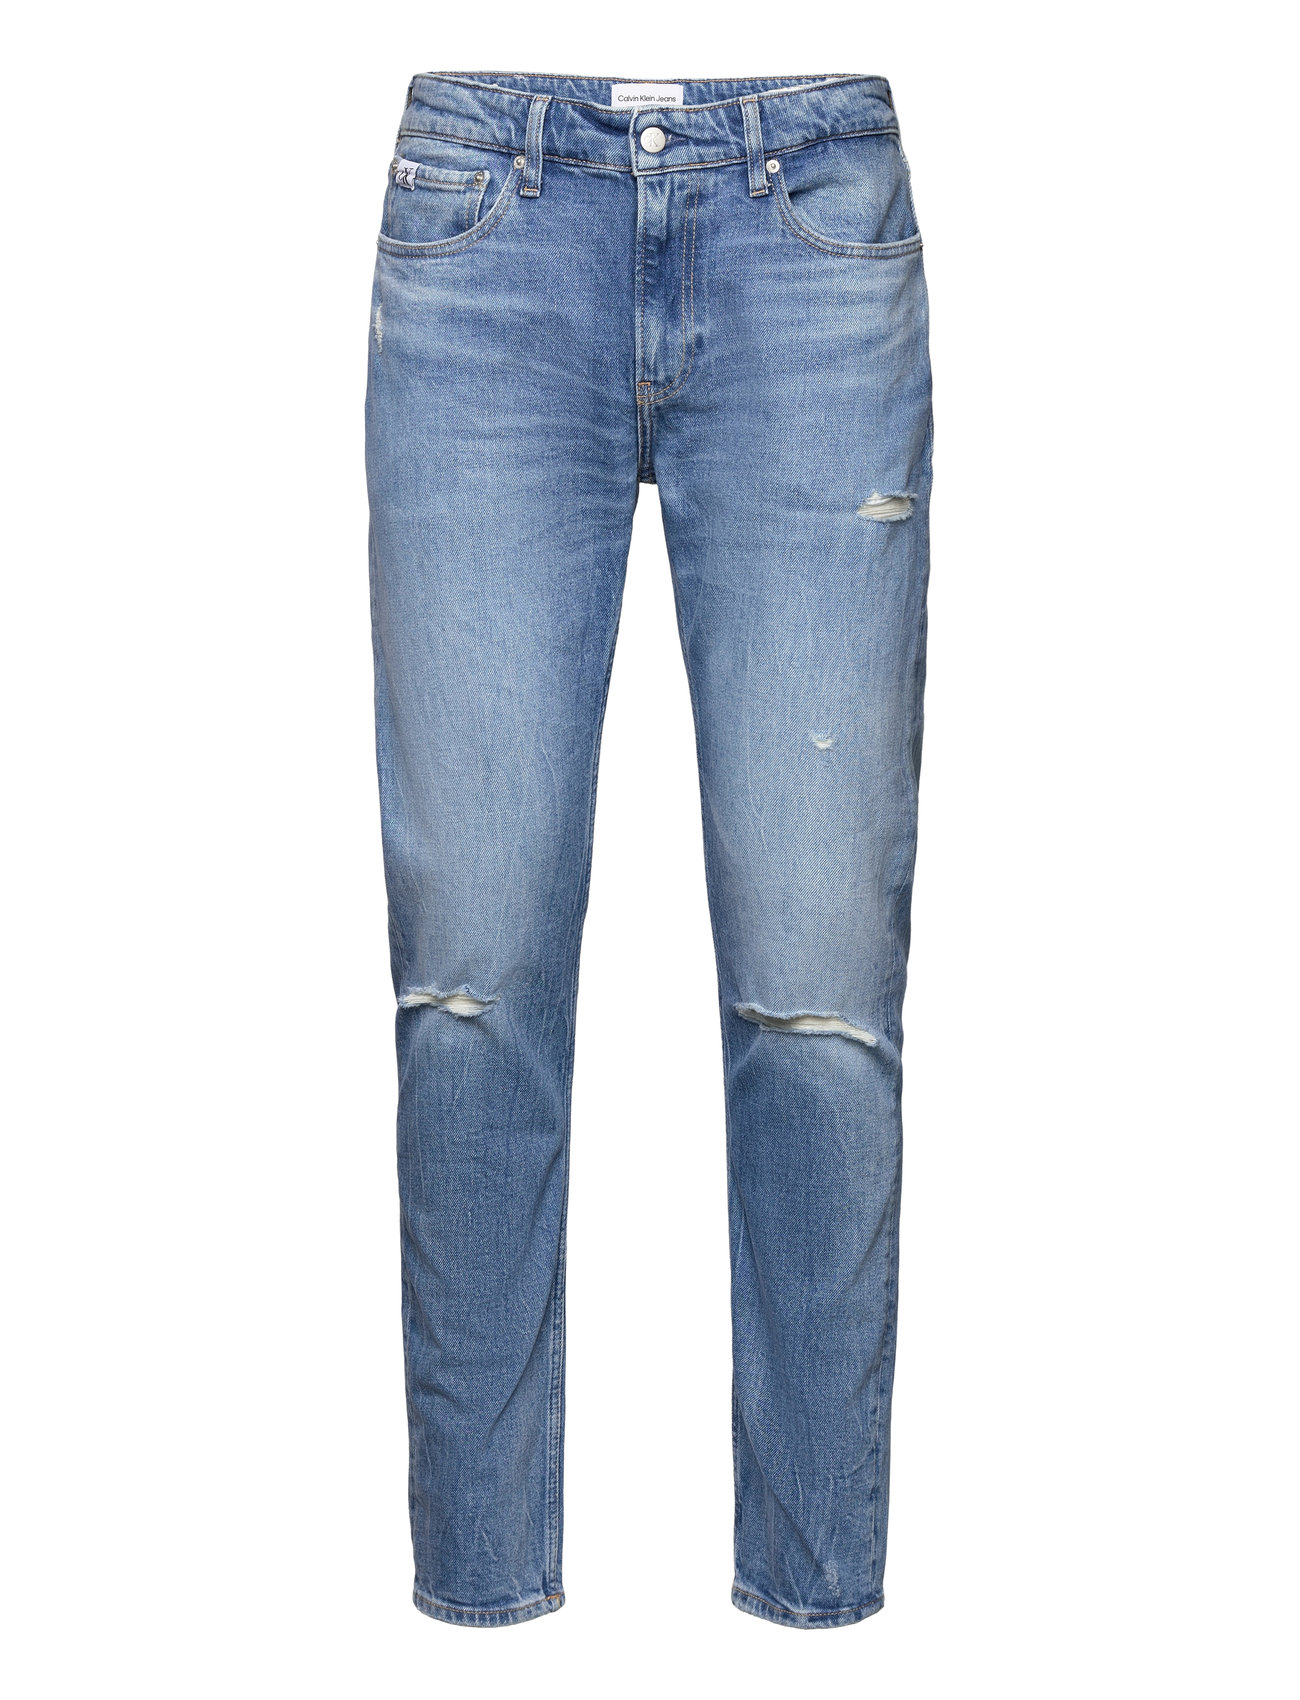 Calvin Klein Jeans MID RISE SKINNY Blue / Medium - Fast delivery